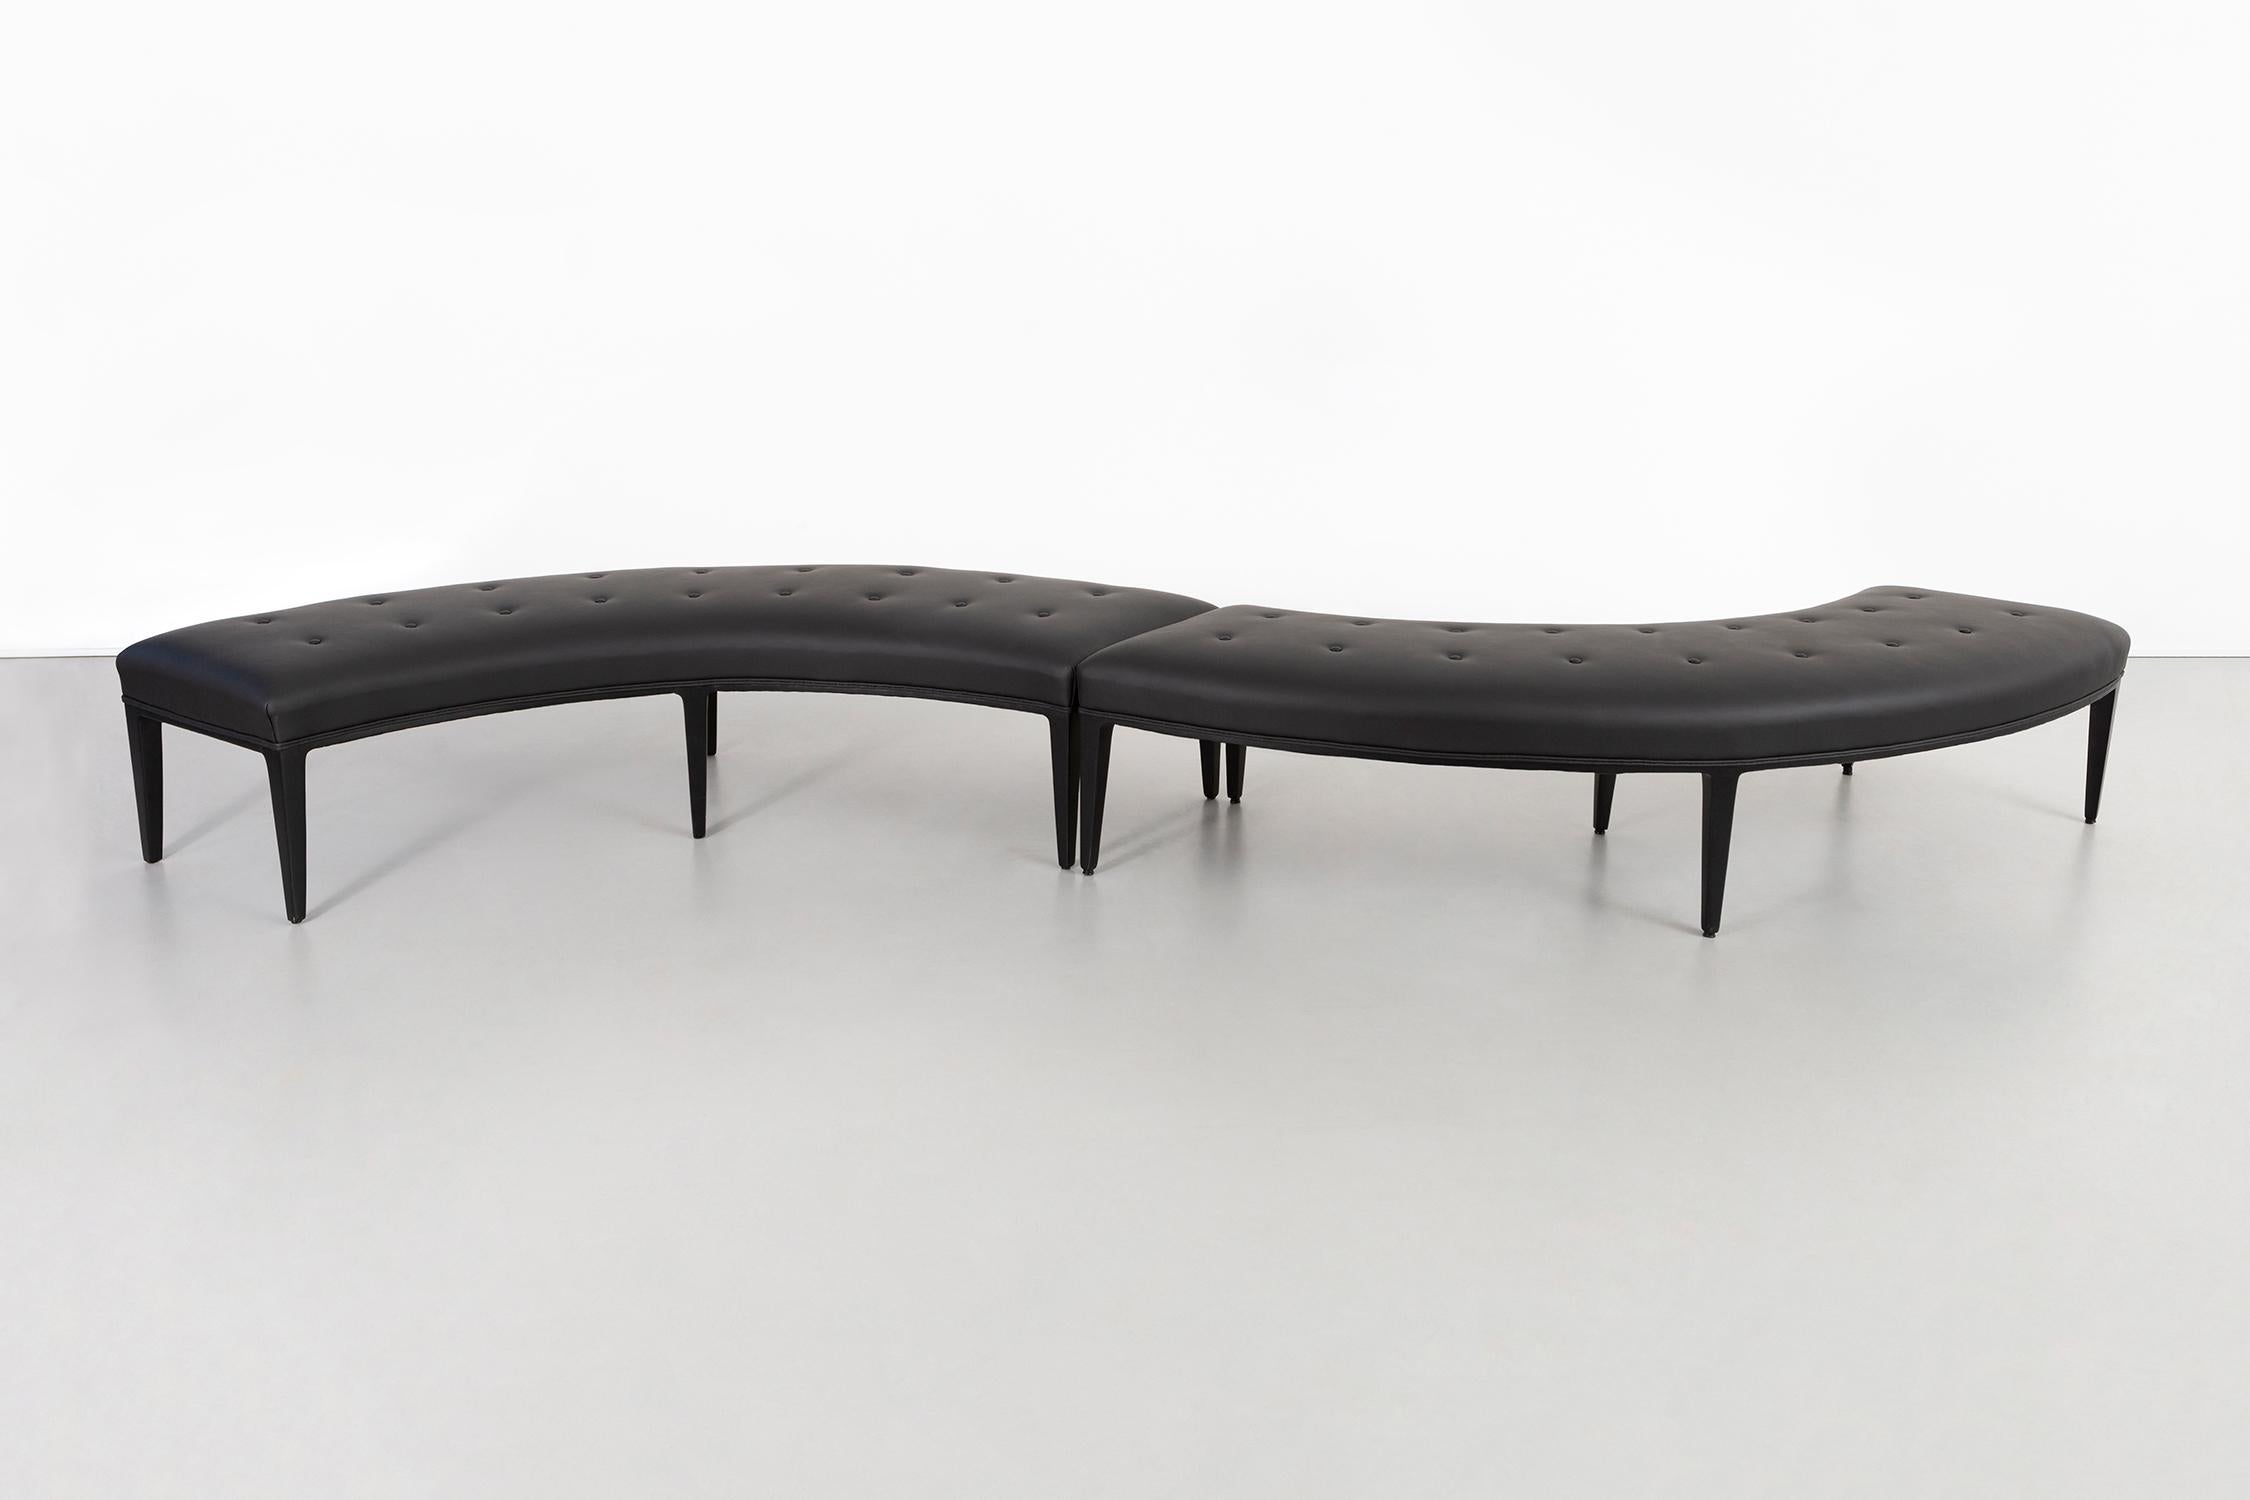 Pair of benches attributed to Harvey Probber

These curved benches have been freshly reupholstered in black leather

The shape allows various configurations

Measurements are per bench

Sold as a set